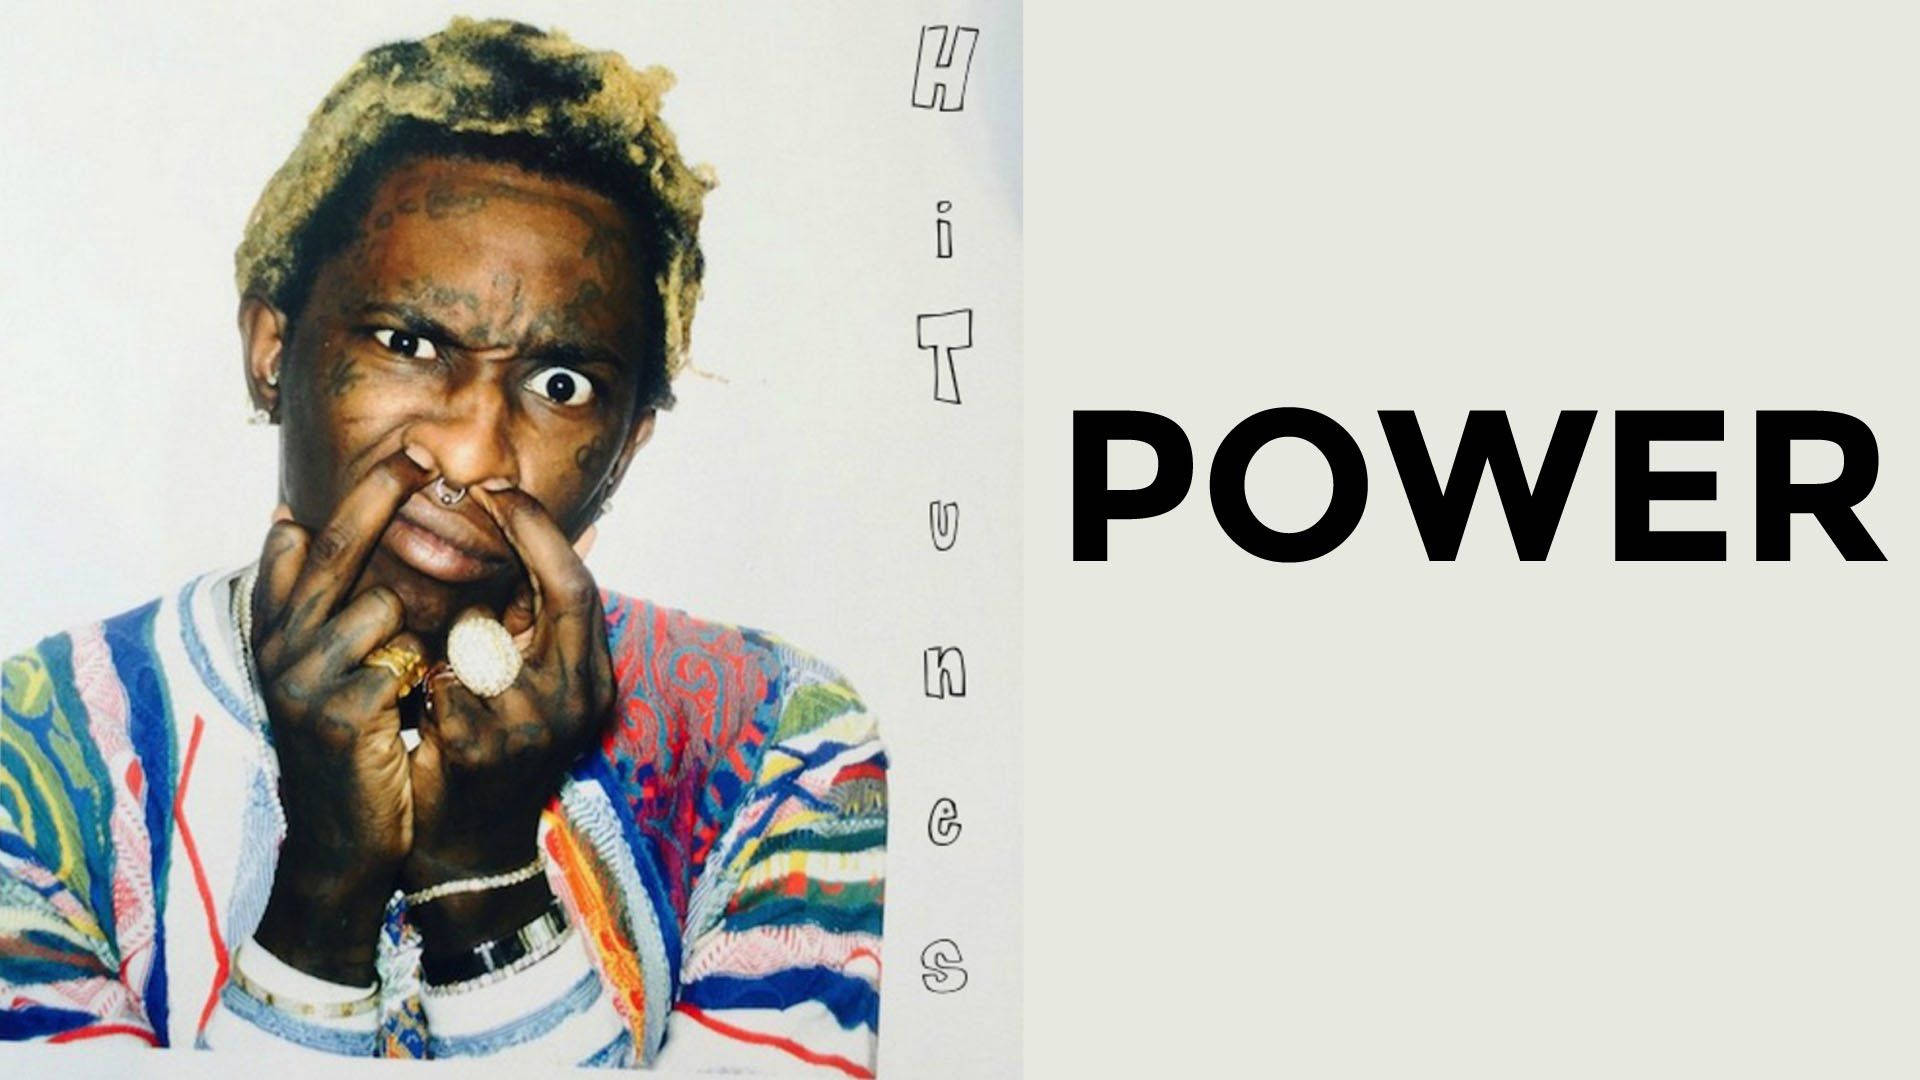 Young Thug 1920X1080 Wallpaper and Background Image